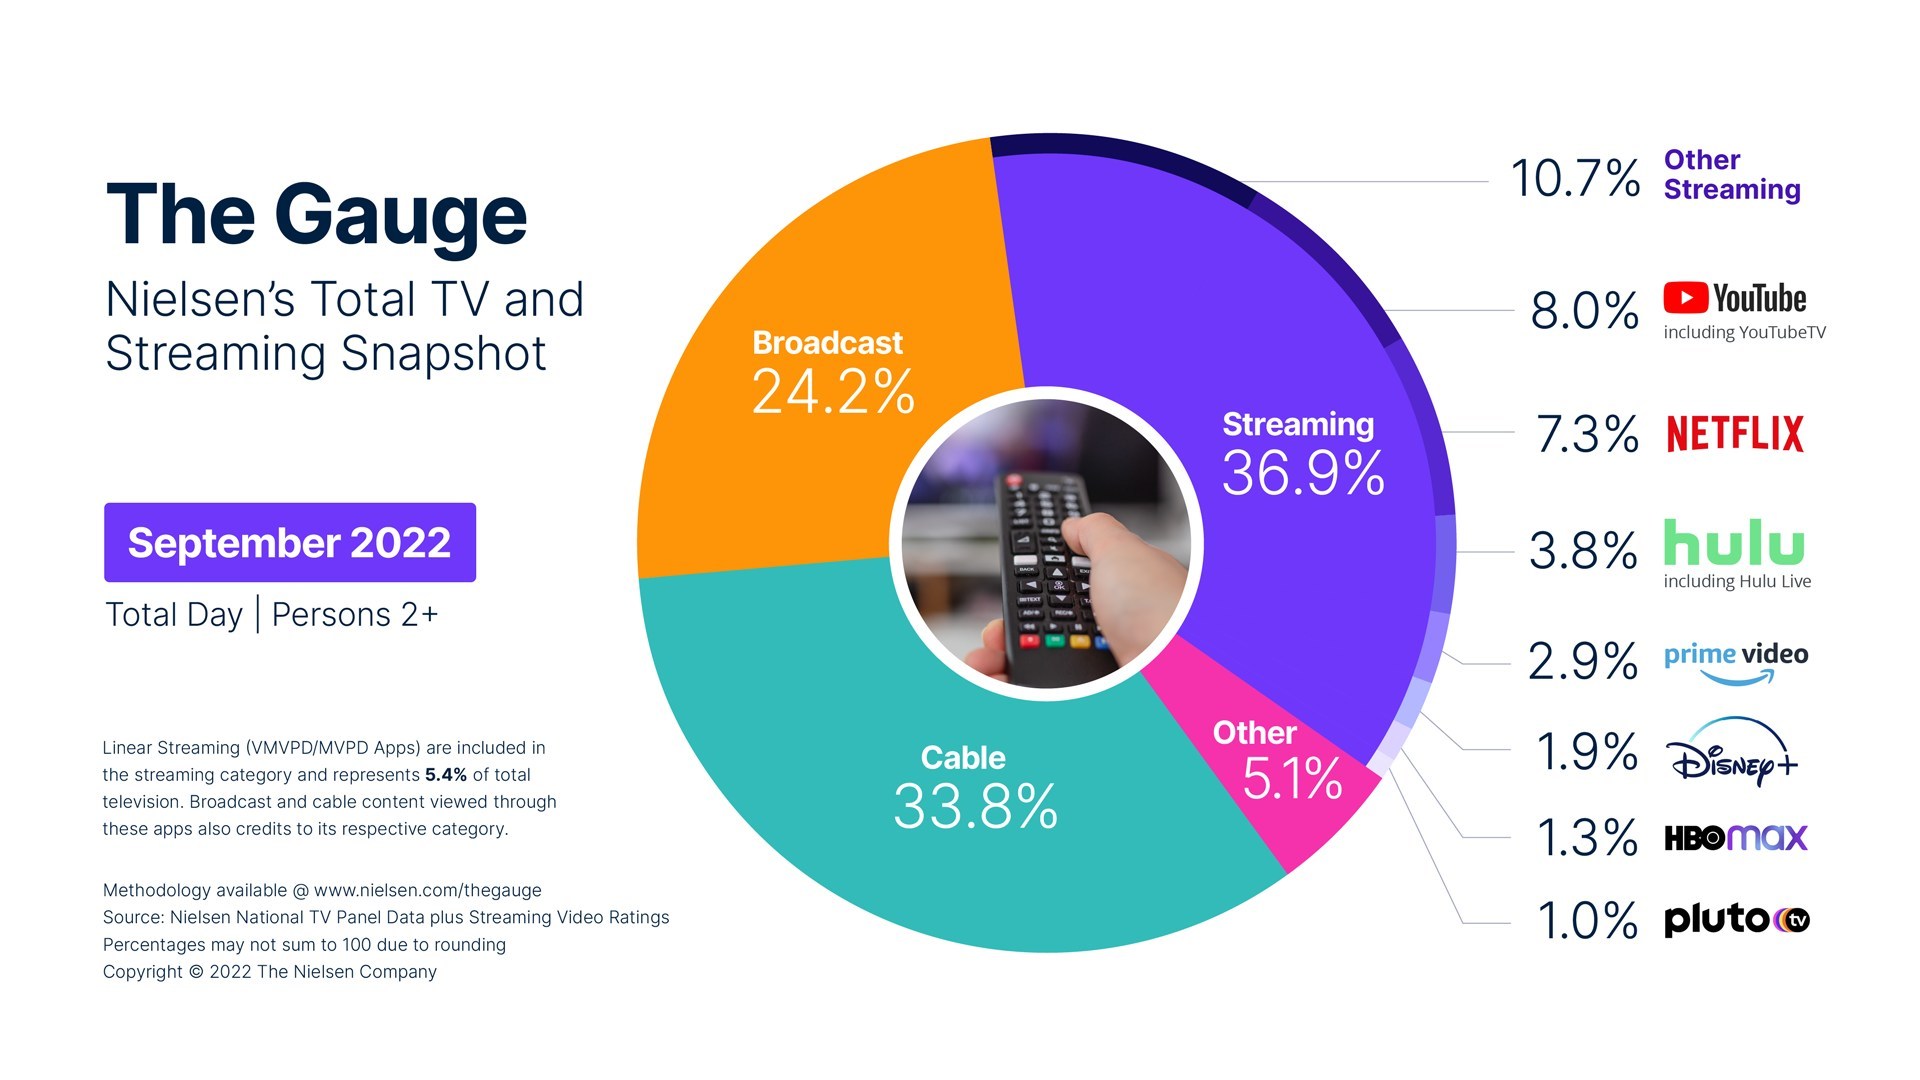 Nielsen 'The Gauge' Total TV and Streaming Snapshot - Streaming (YouTube, Netflix, Hulu, Amazon Prime Video, Disney+, HBO Max, Pluto TV, Other streaming), Cable TV, Broadcast, Other - September 2022